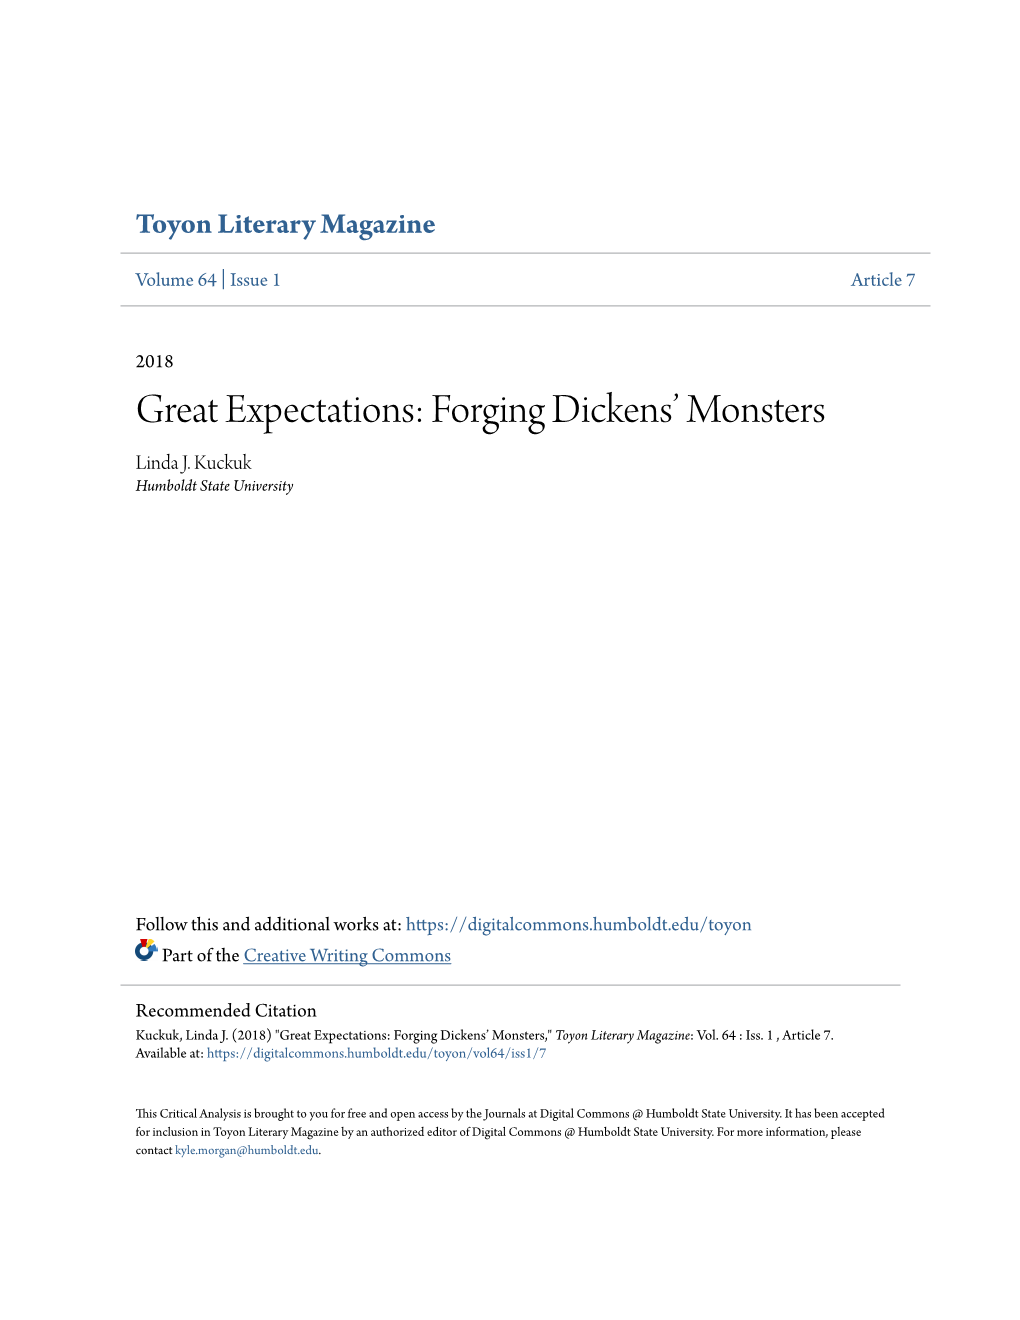 Great Expectations: Forging Dickens’ Monsters Linda J